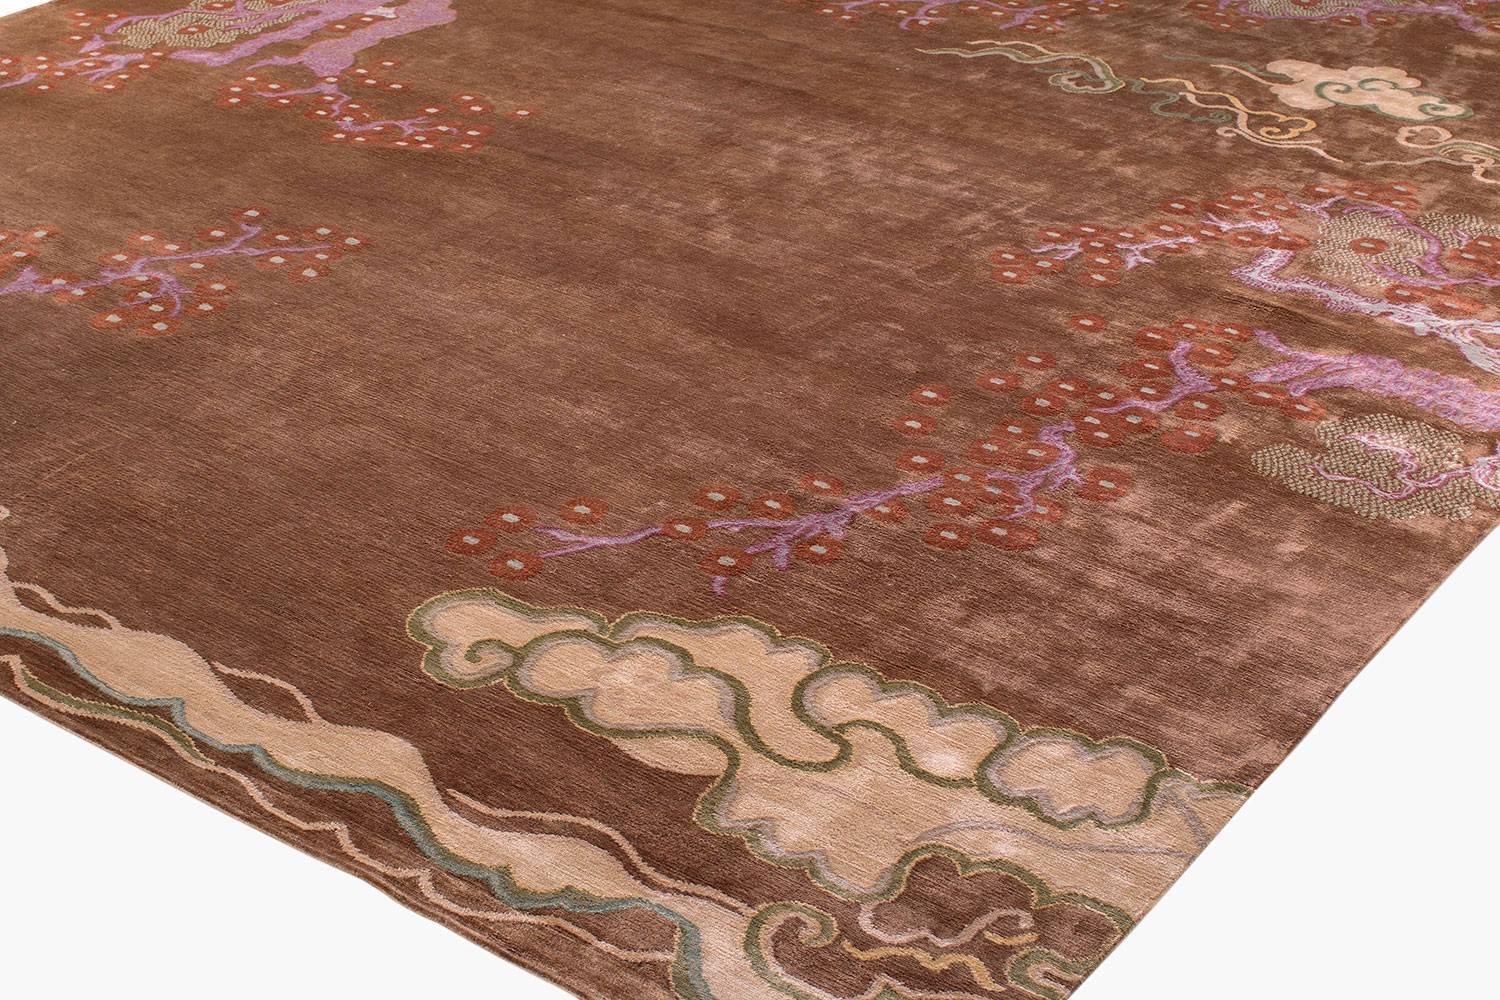 Tree and Cloud three is an ode to spring days and Classic Eastern motifs. On a bronze background, fragrant cherry blossoms of copper and violet bloom under whimsical floating clouds. Woven in luxurious silk. Designed by Joseph Carini.

Shown in